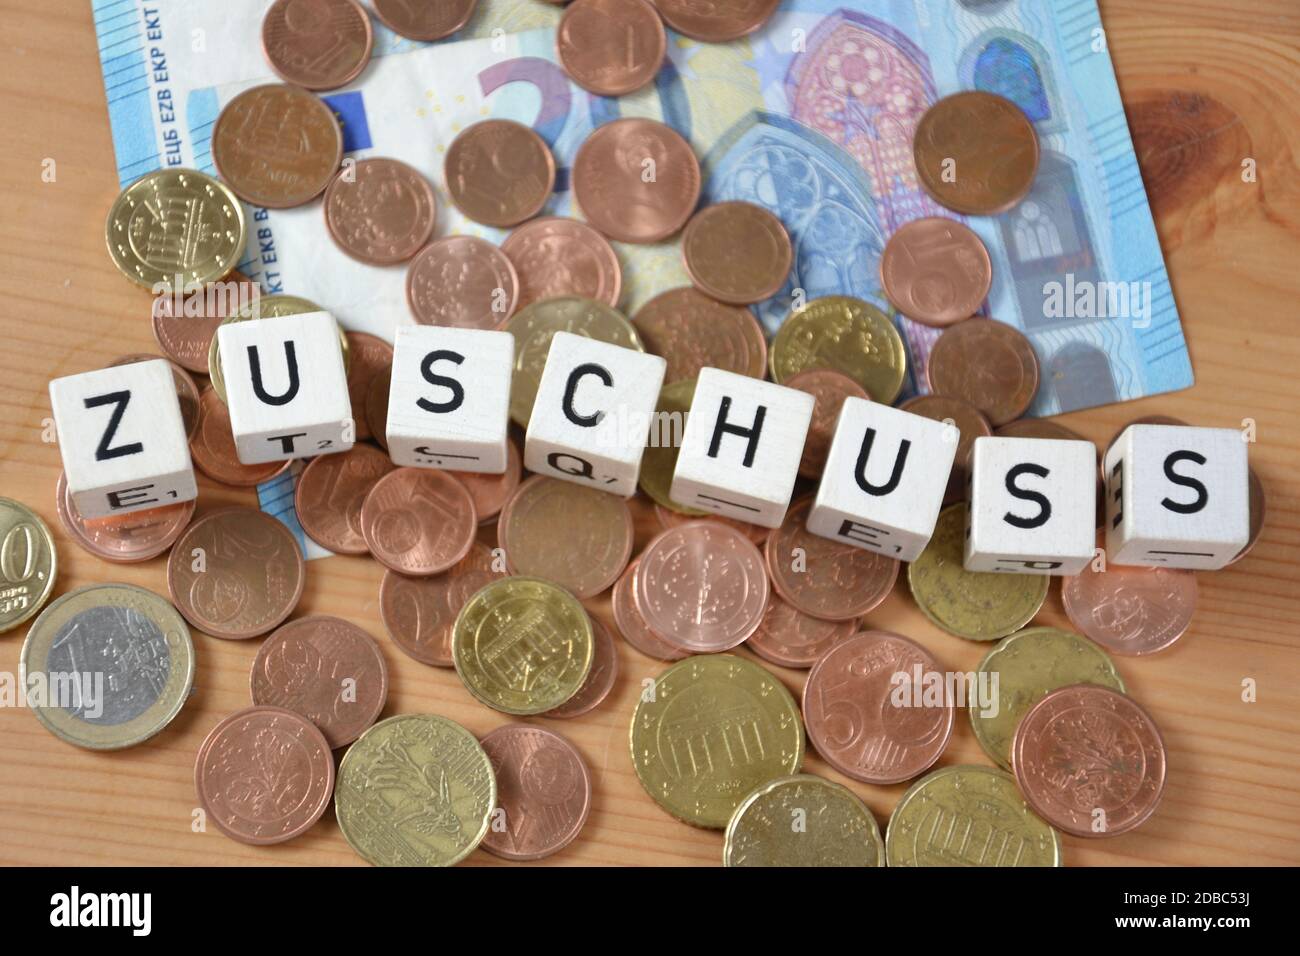 Zuschuss - the german word for grant Stock Photo